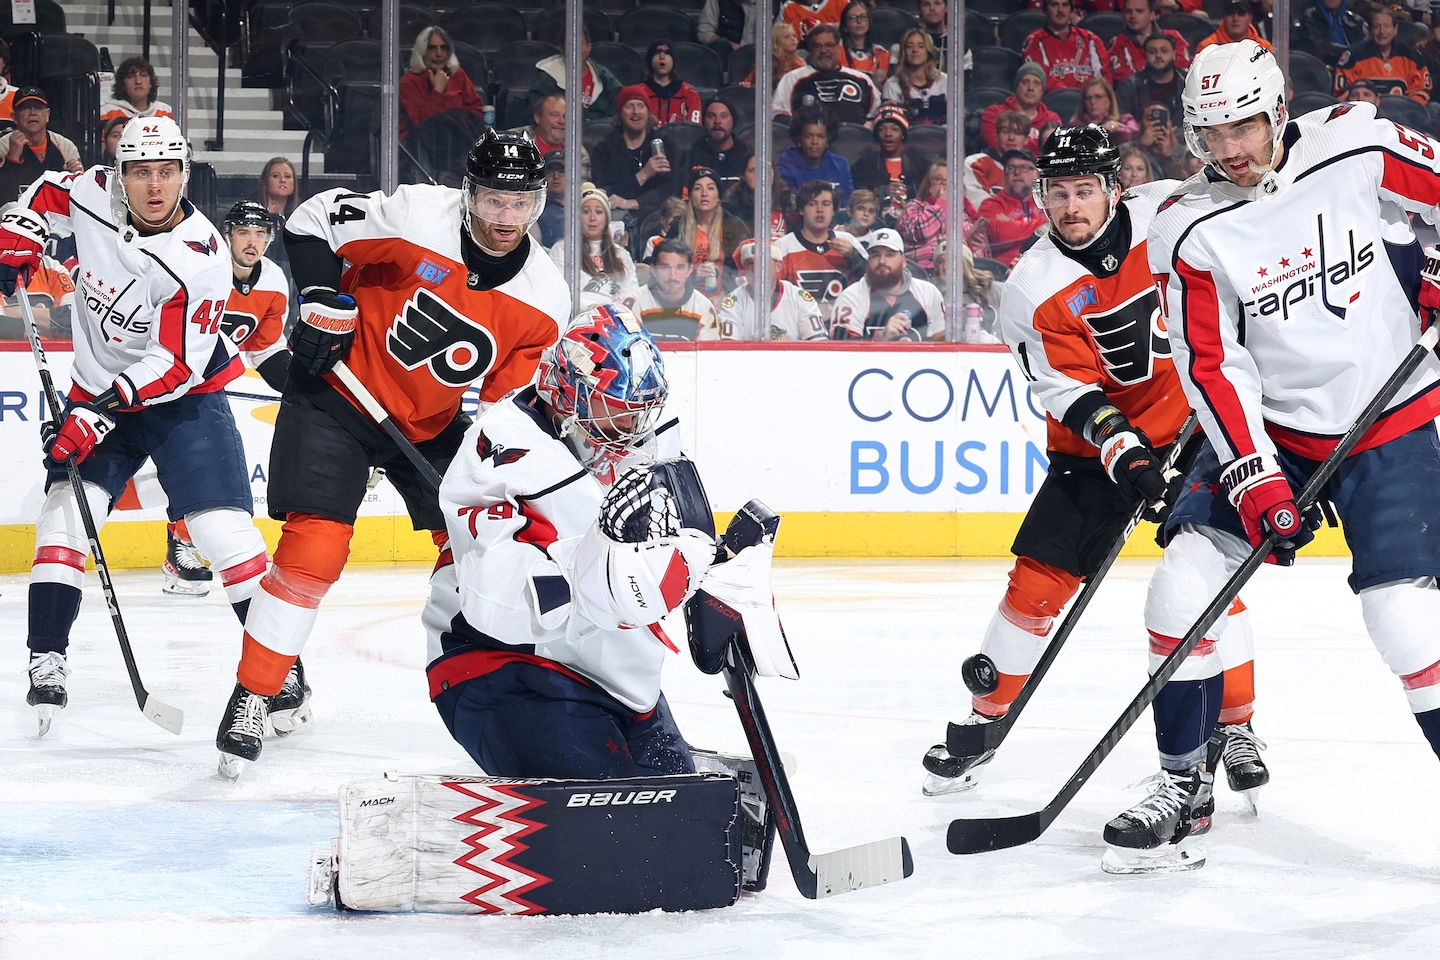 Shorthanded Capitals give up lead, lose in shootout against the Flyers